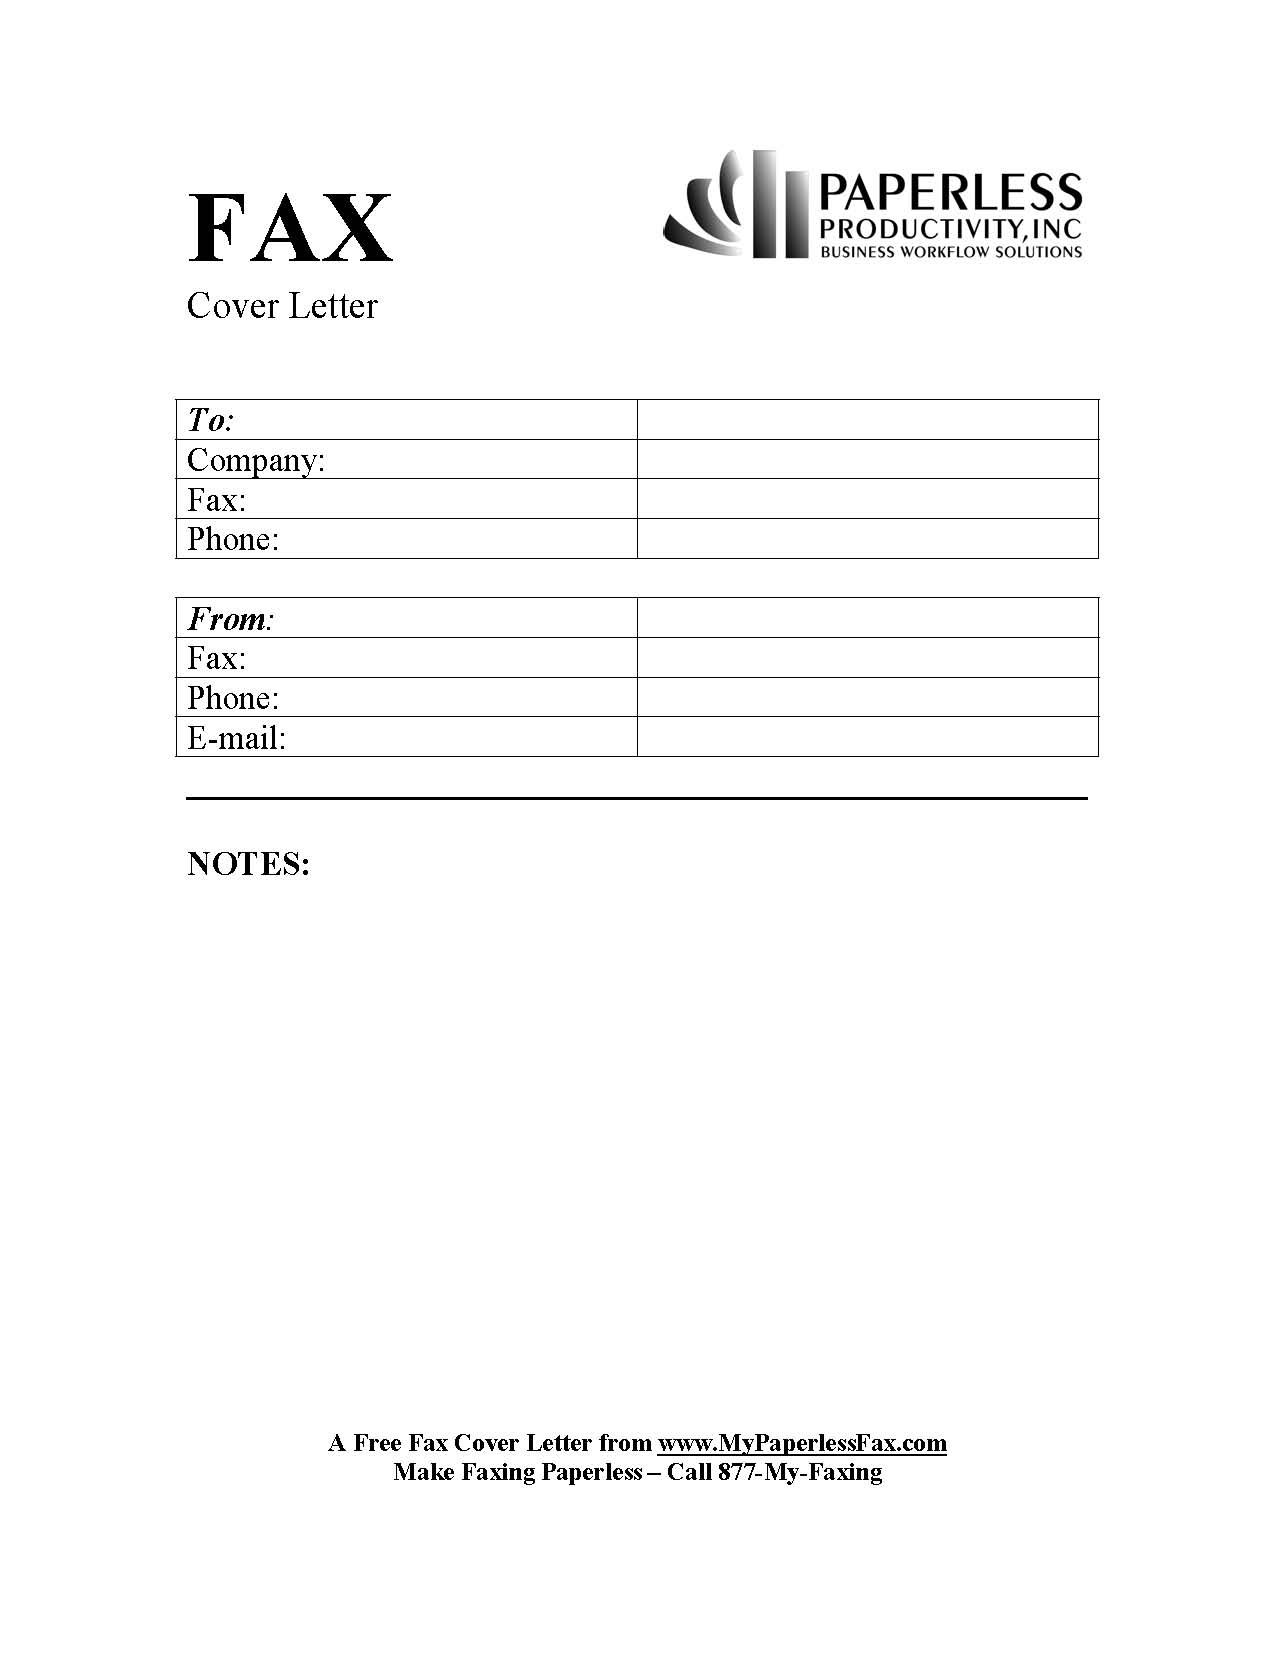 Fax cover letter template form